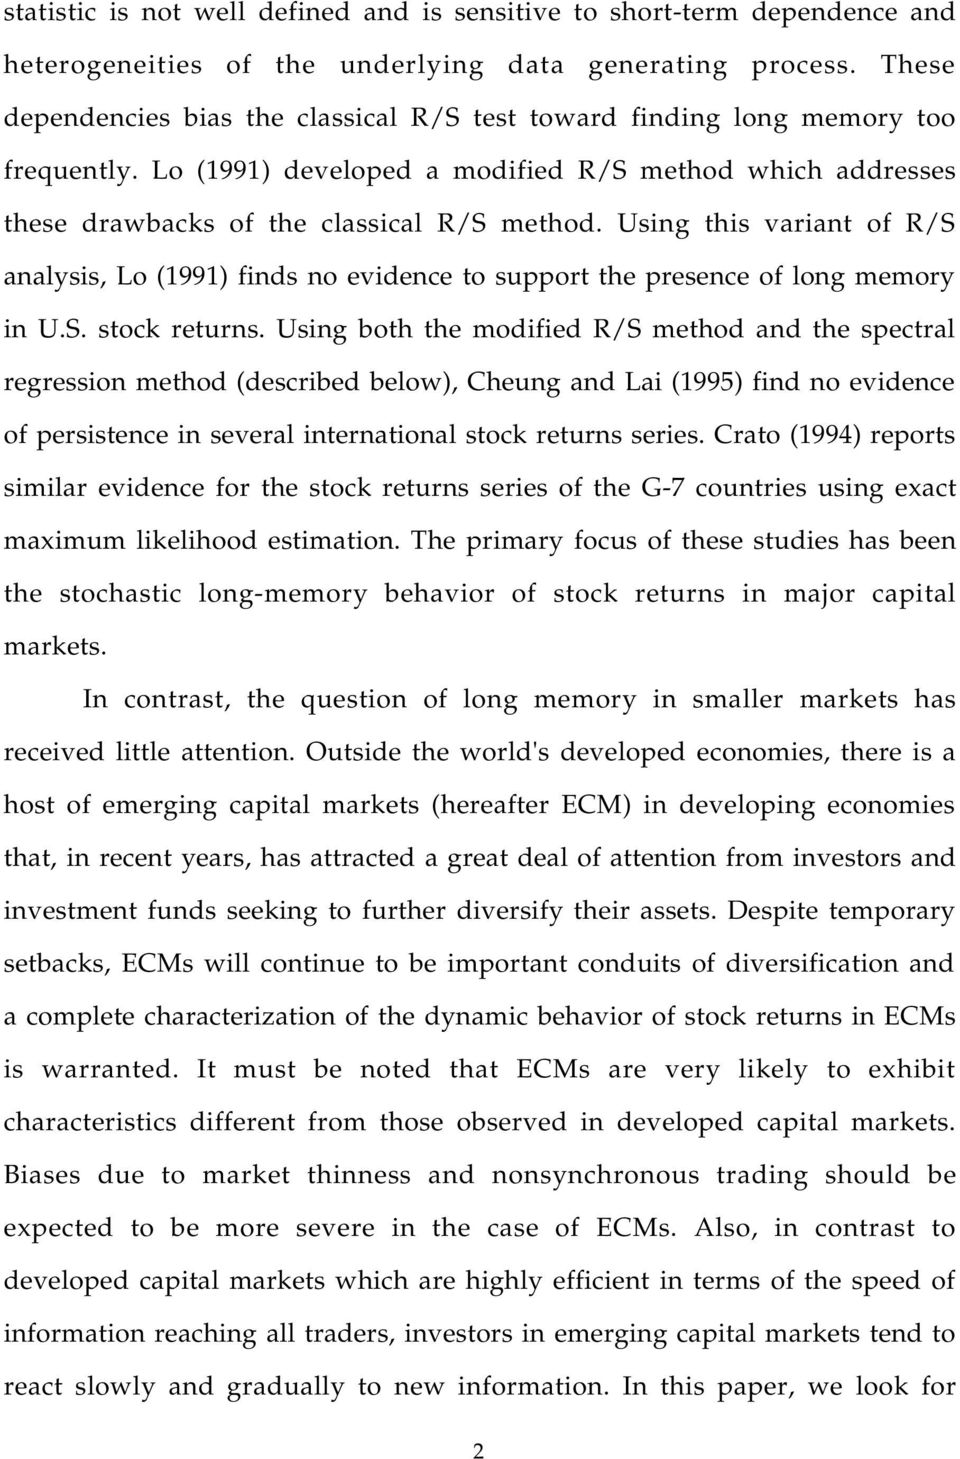 Using this variant of R/S analysis, Lo (1991) finds no evidence to support the presence of long memory in U.S. stock returns.